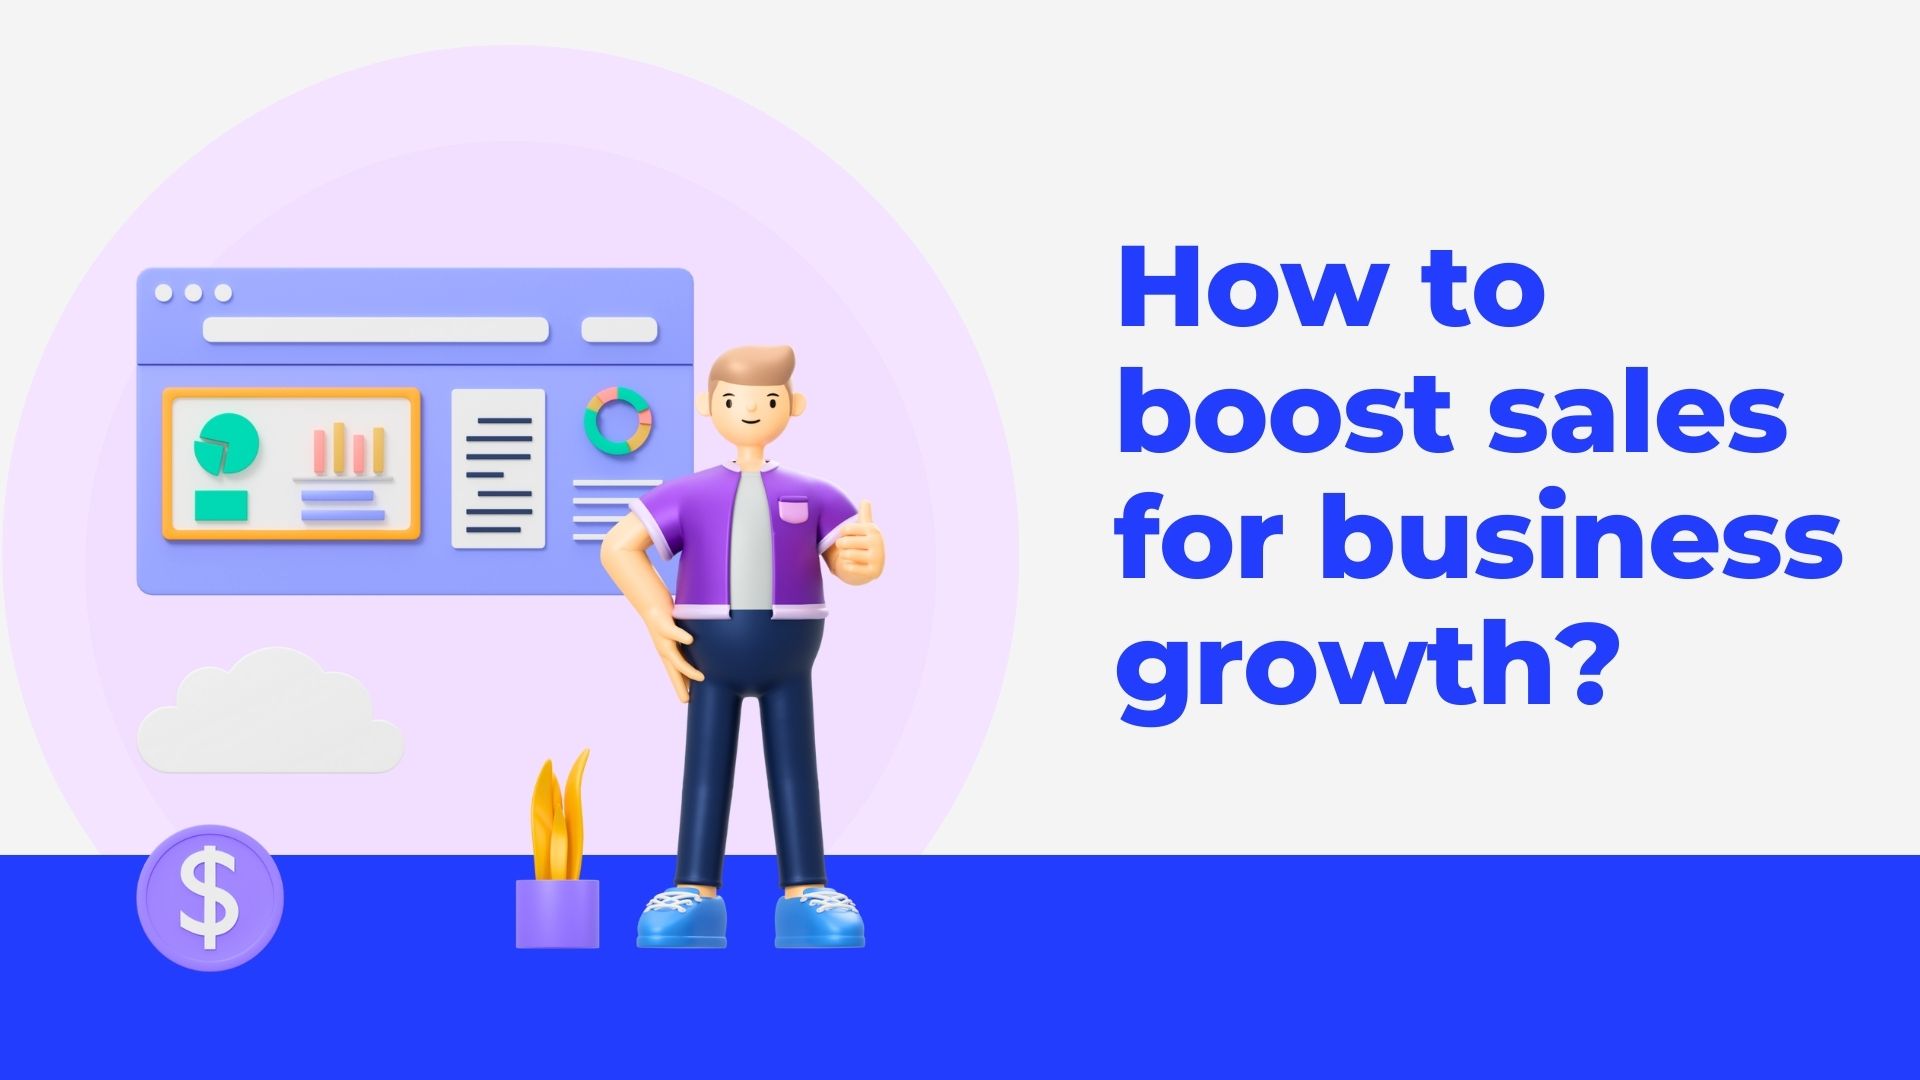 How to boost sales for business growth?